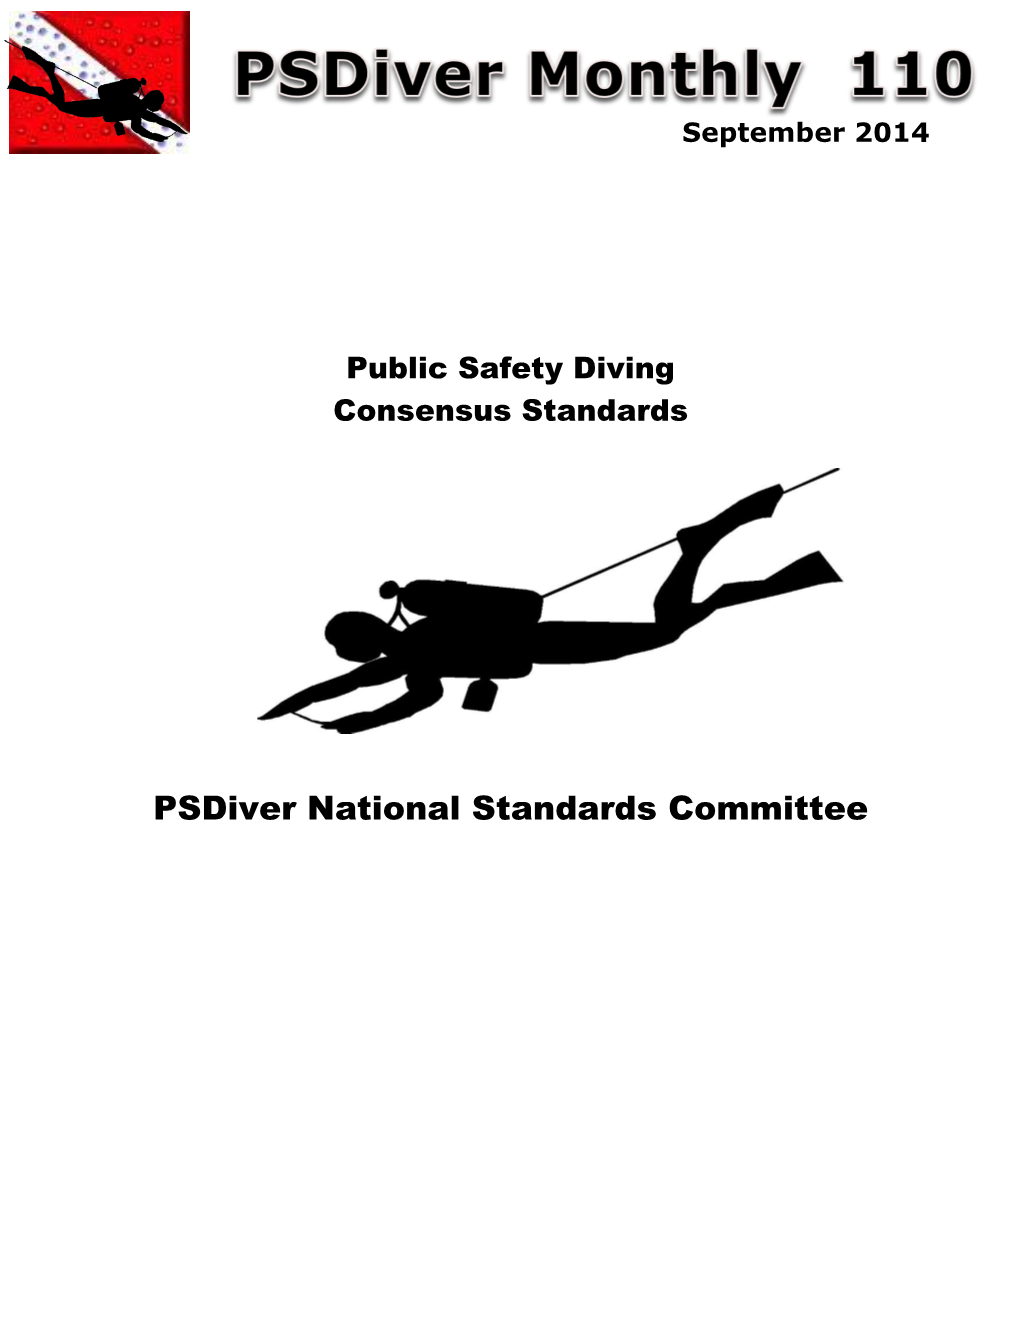 Proposed Consensus Standards for Public Safety Diving Rev 7.5 Page 2 of 42